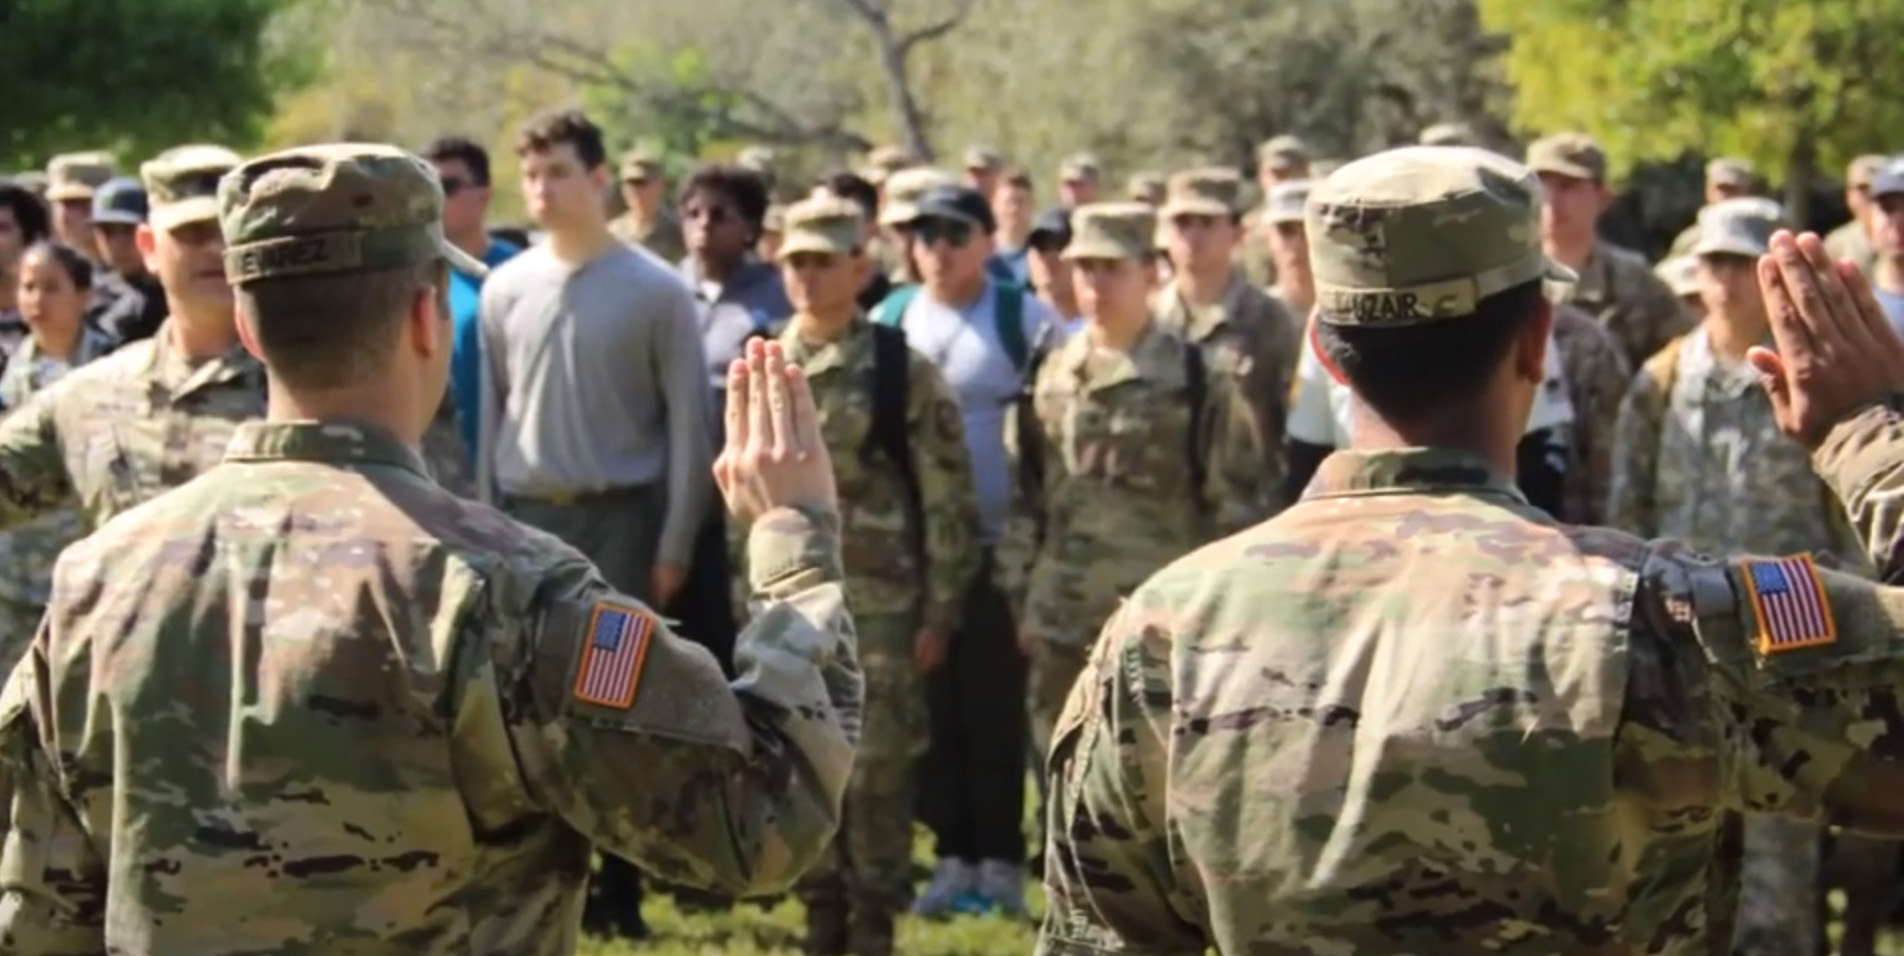 swearing in a group of cadets